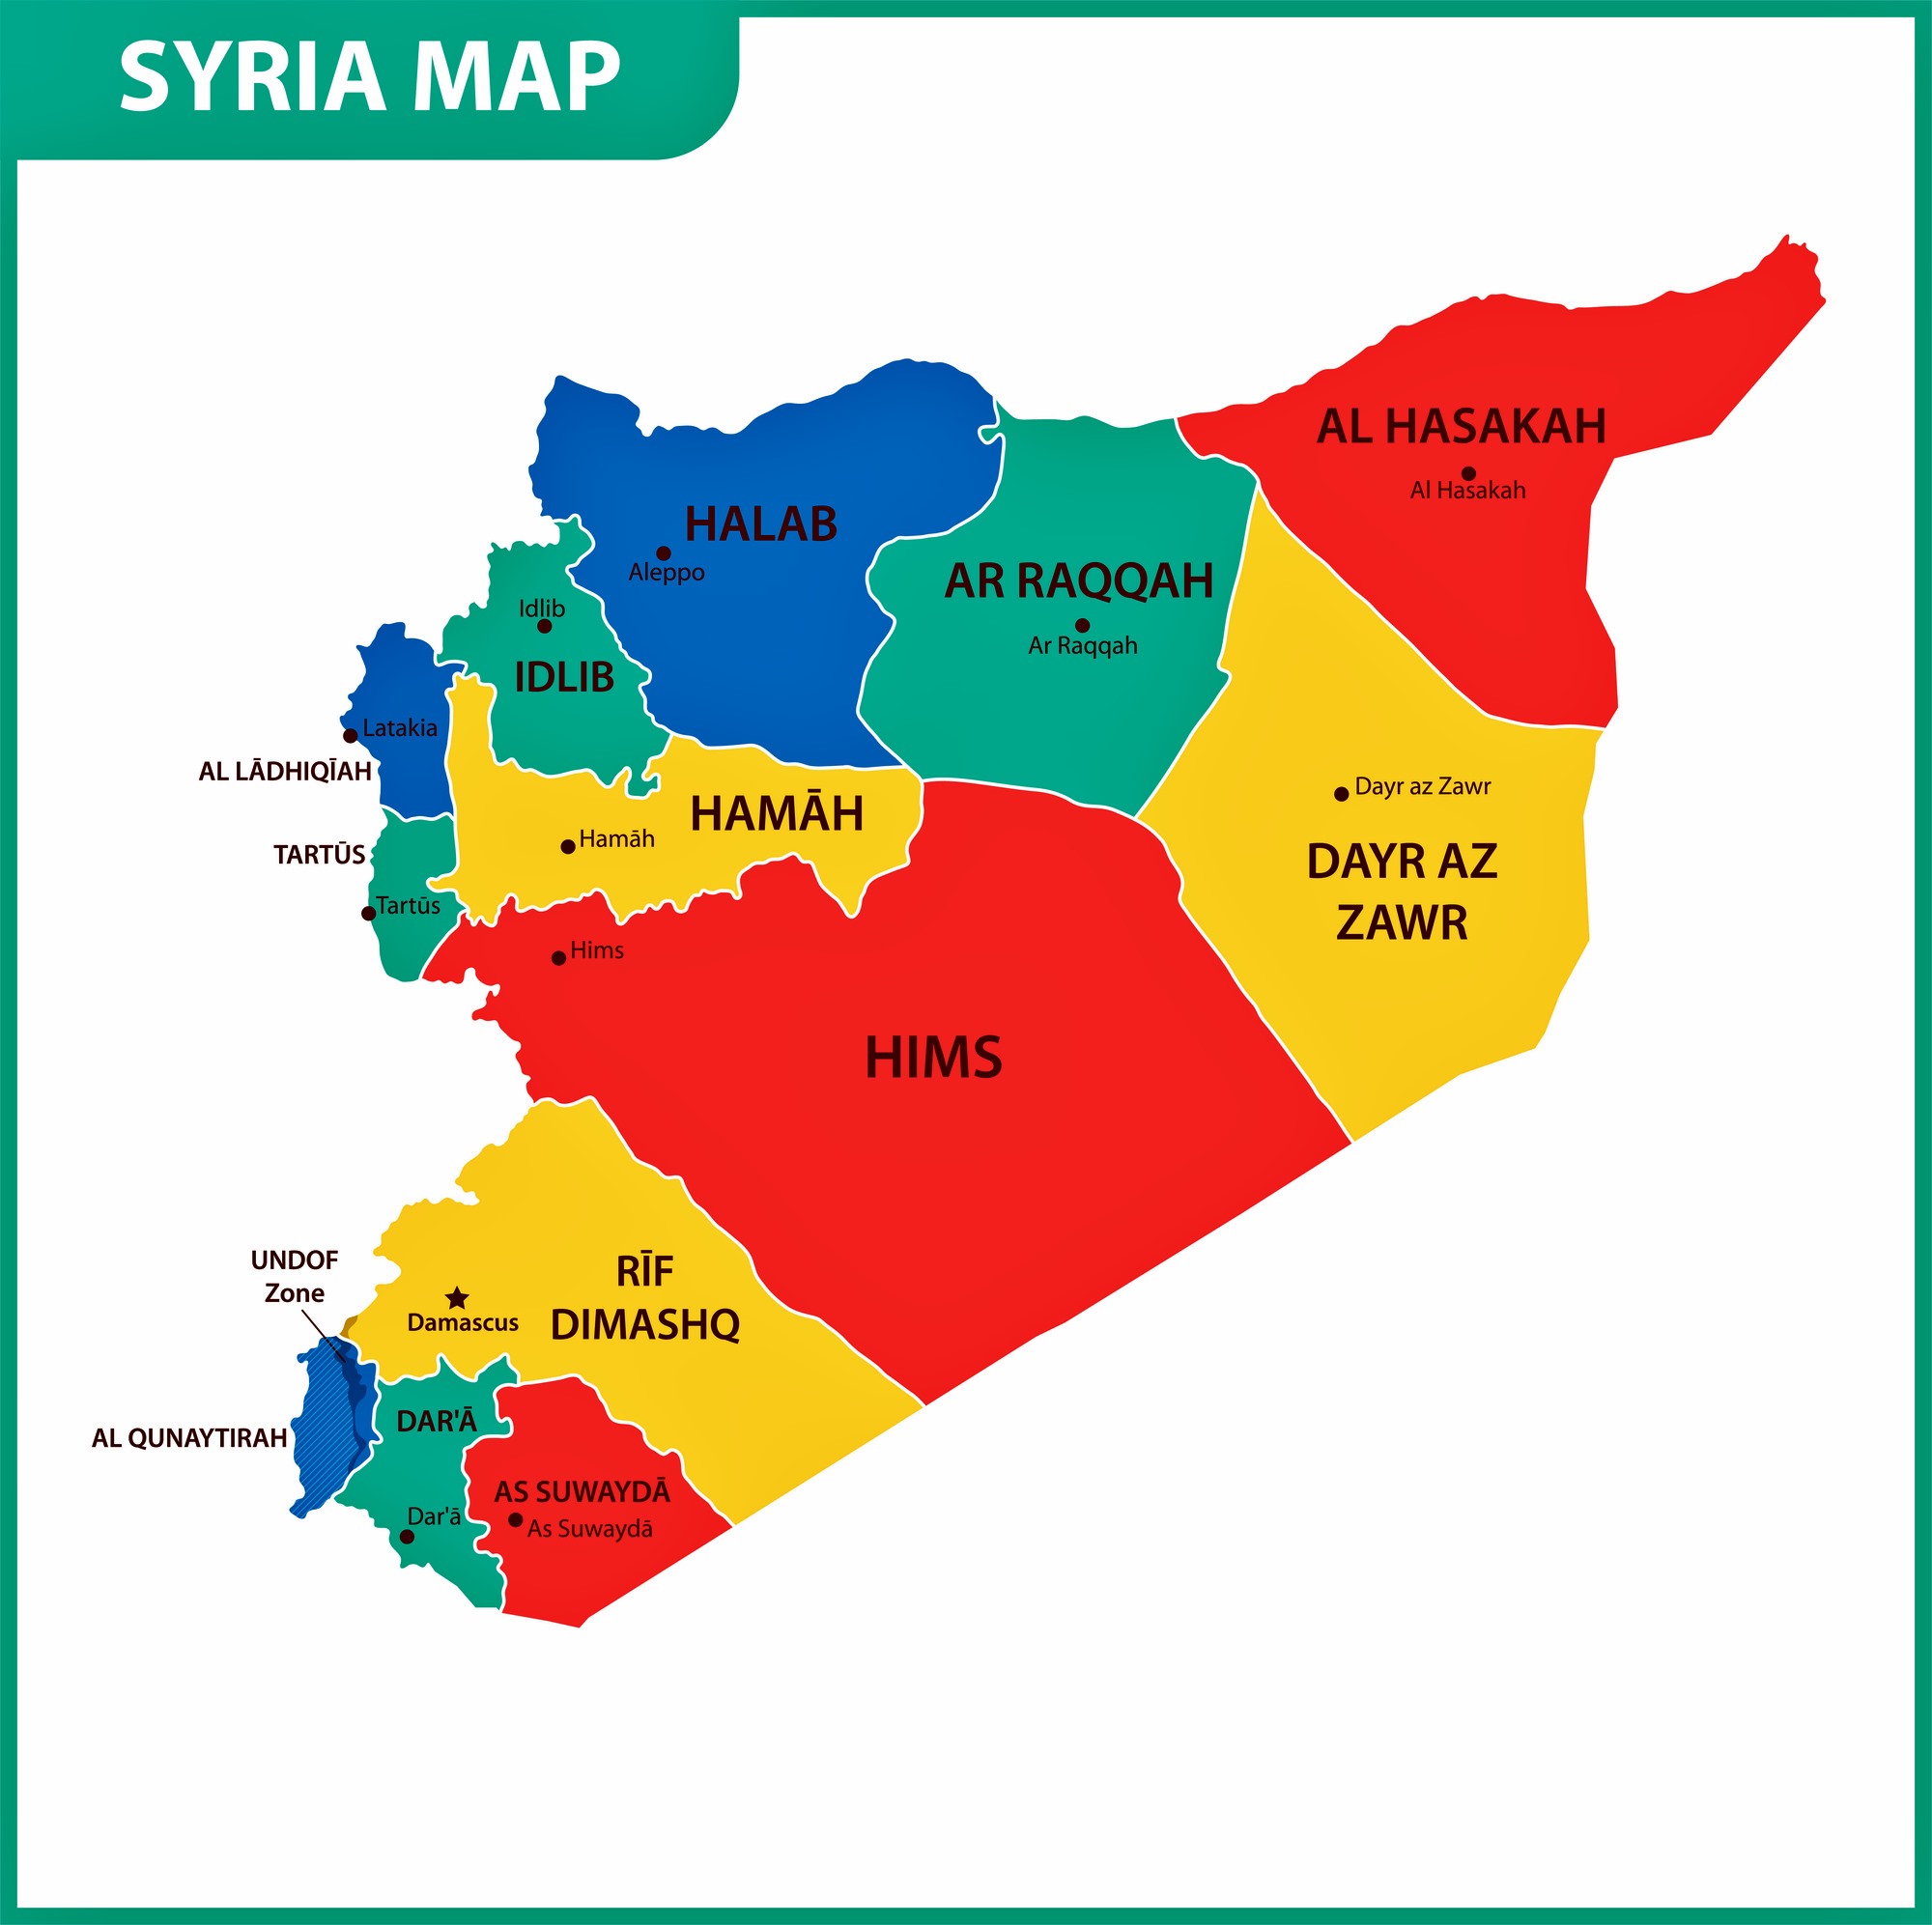 Syria Map of Regions and Provinces